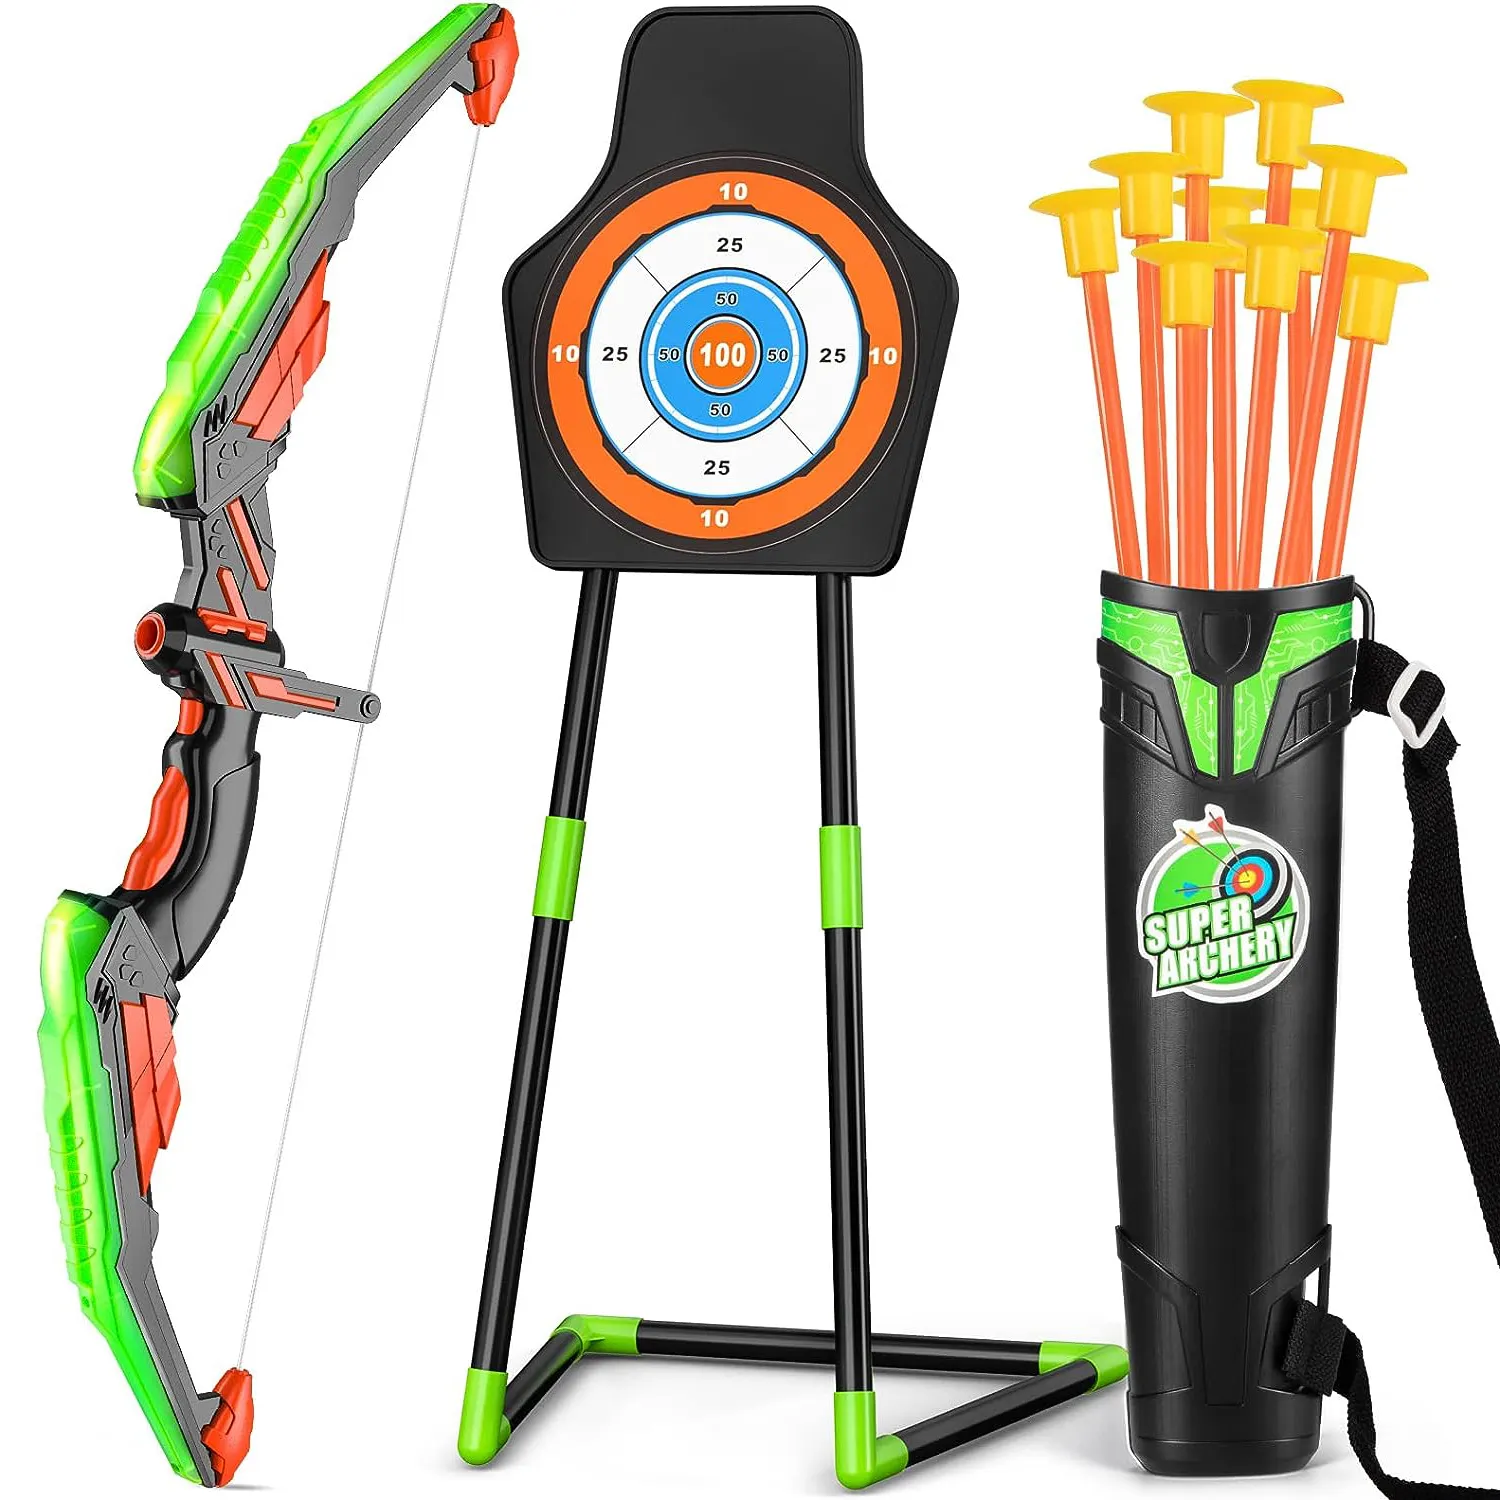 Toy Bow and Arrow Archery LED Light Up Girls Boys Toy Set For Kids with 10 Suction Cup Arrows and Target Indoor Outdoor Toys